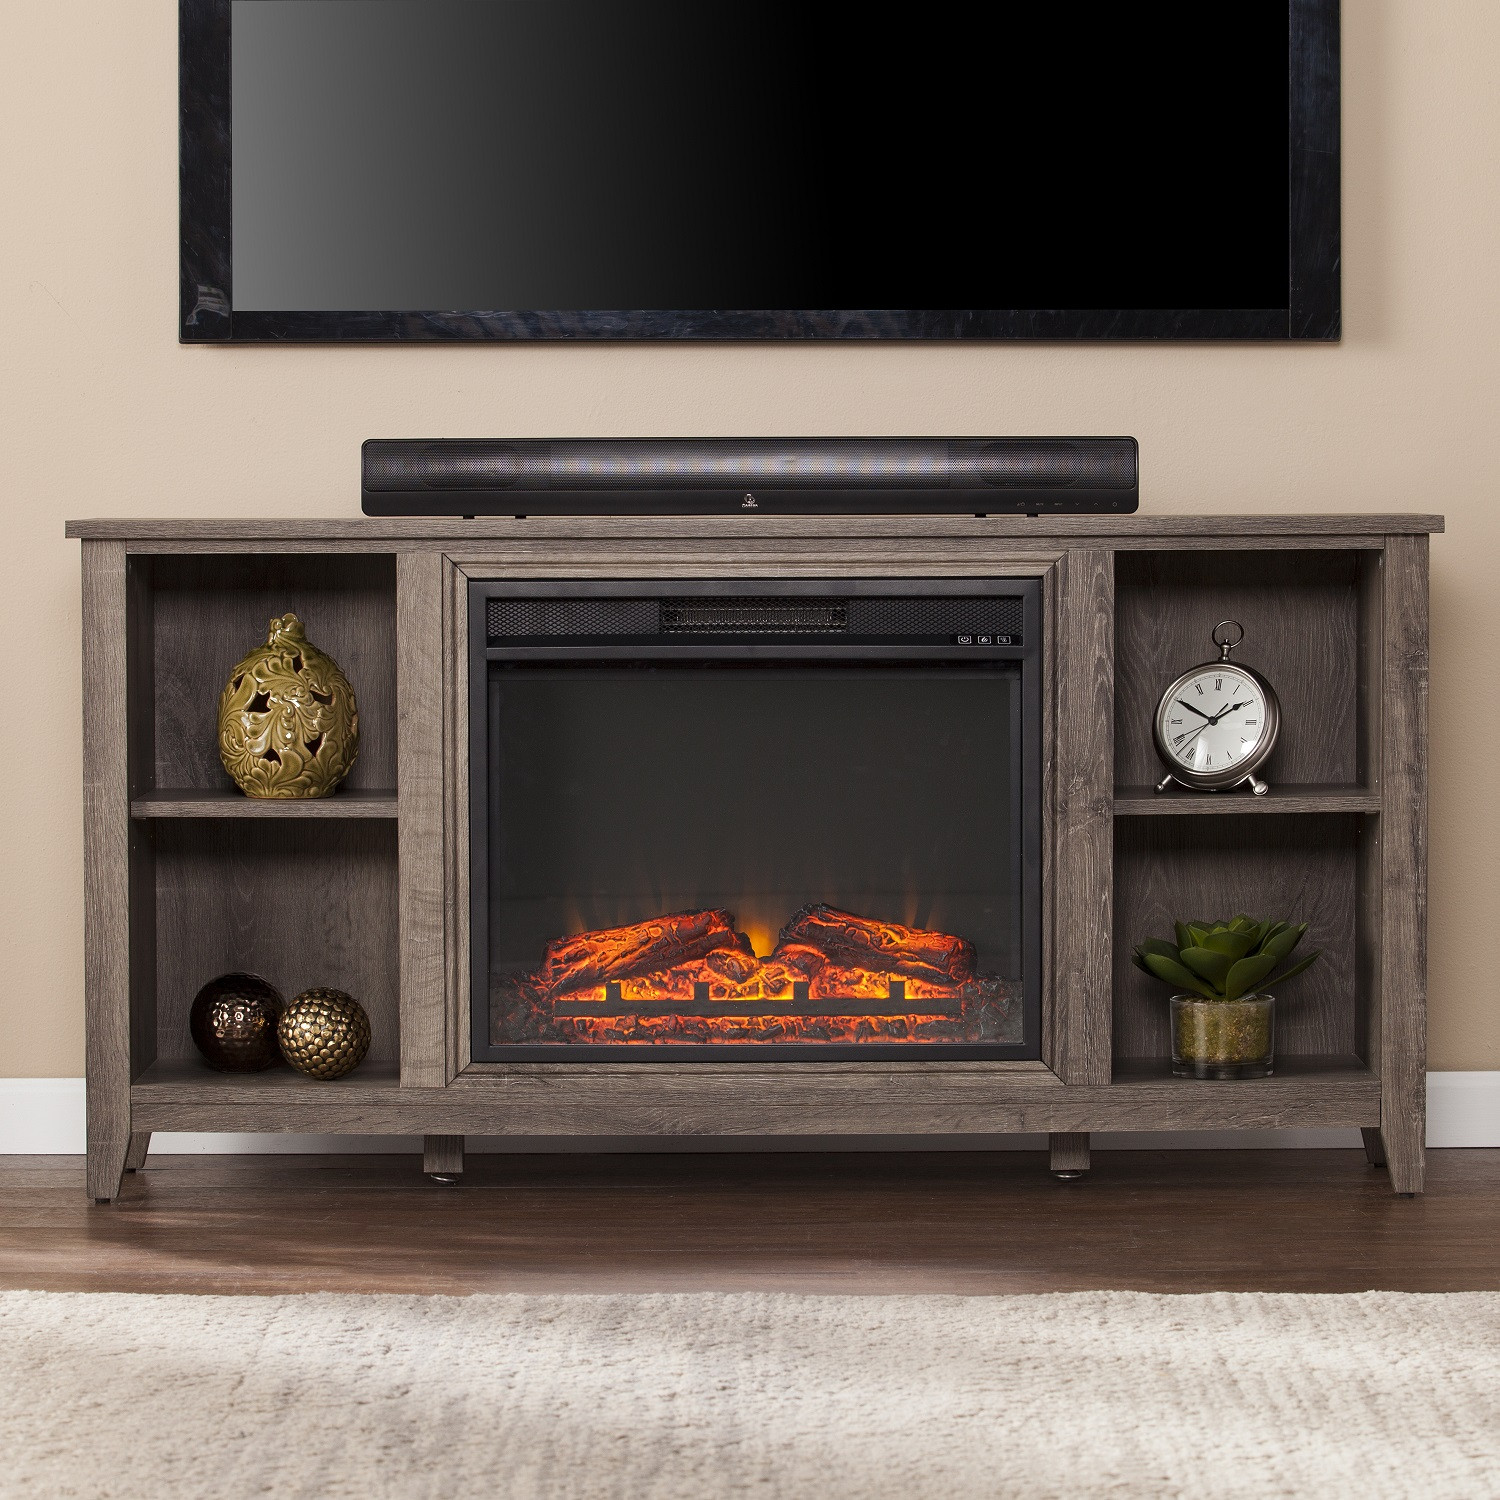 Tv Electric Fireplace
 55 1 2" Parkdale Electric Fireplace TV Stand Mocha Gray